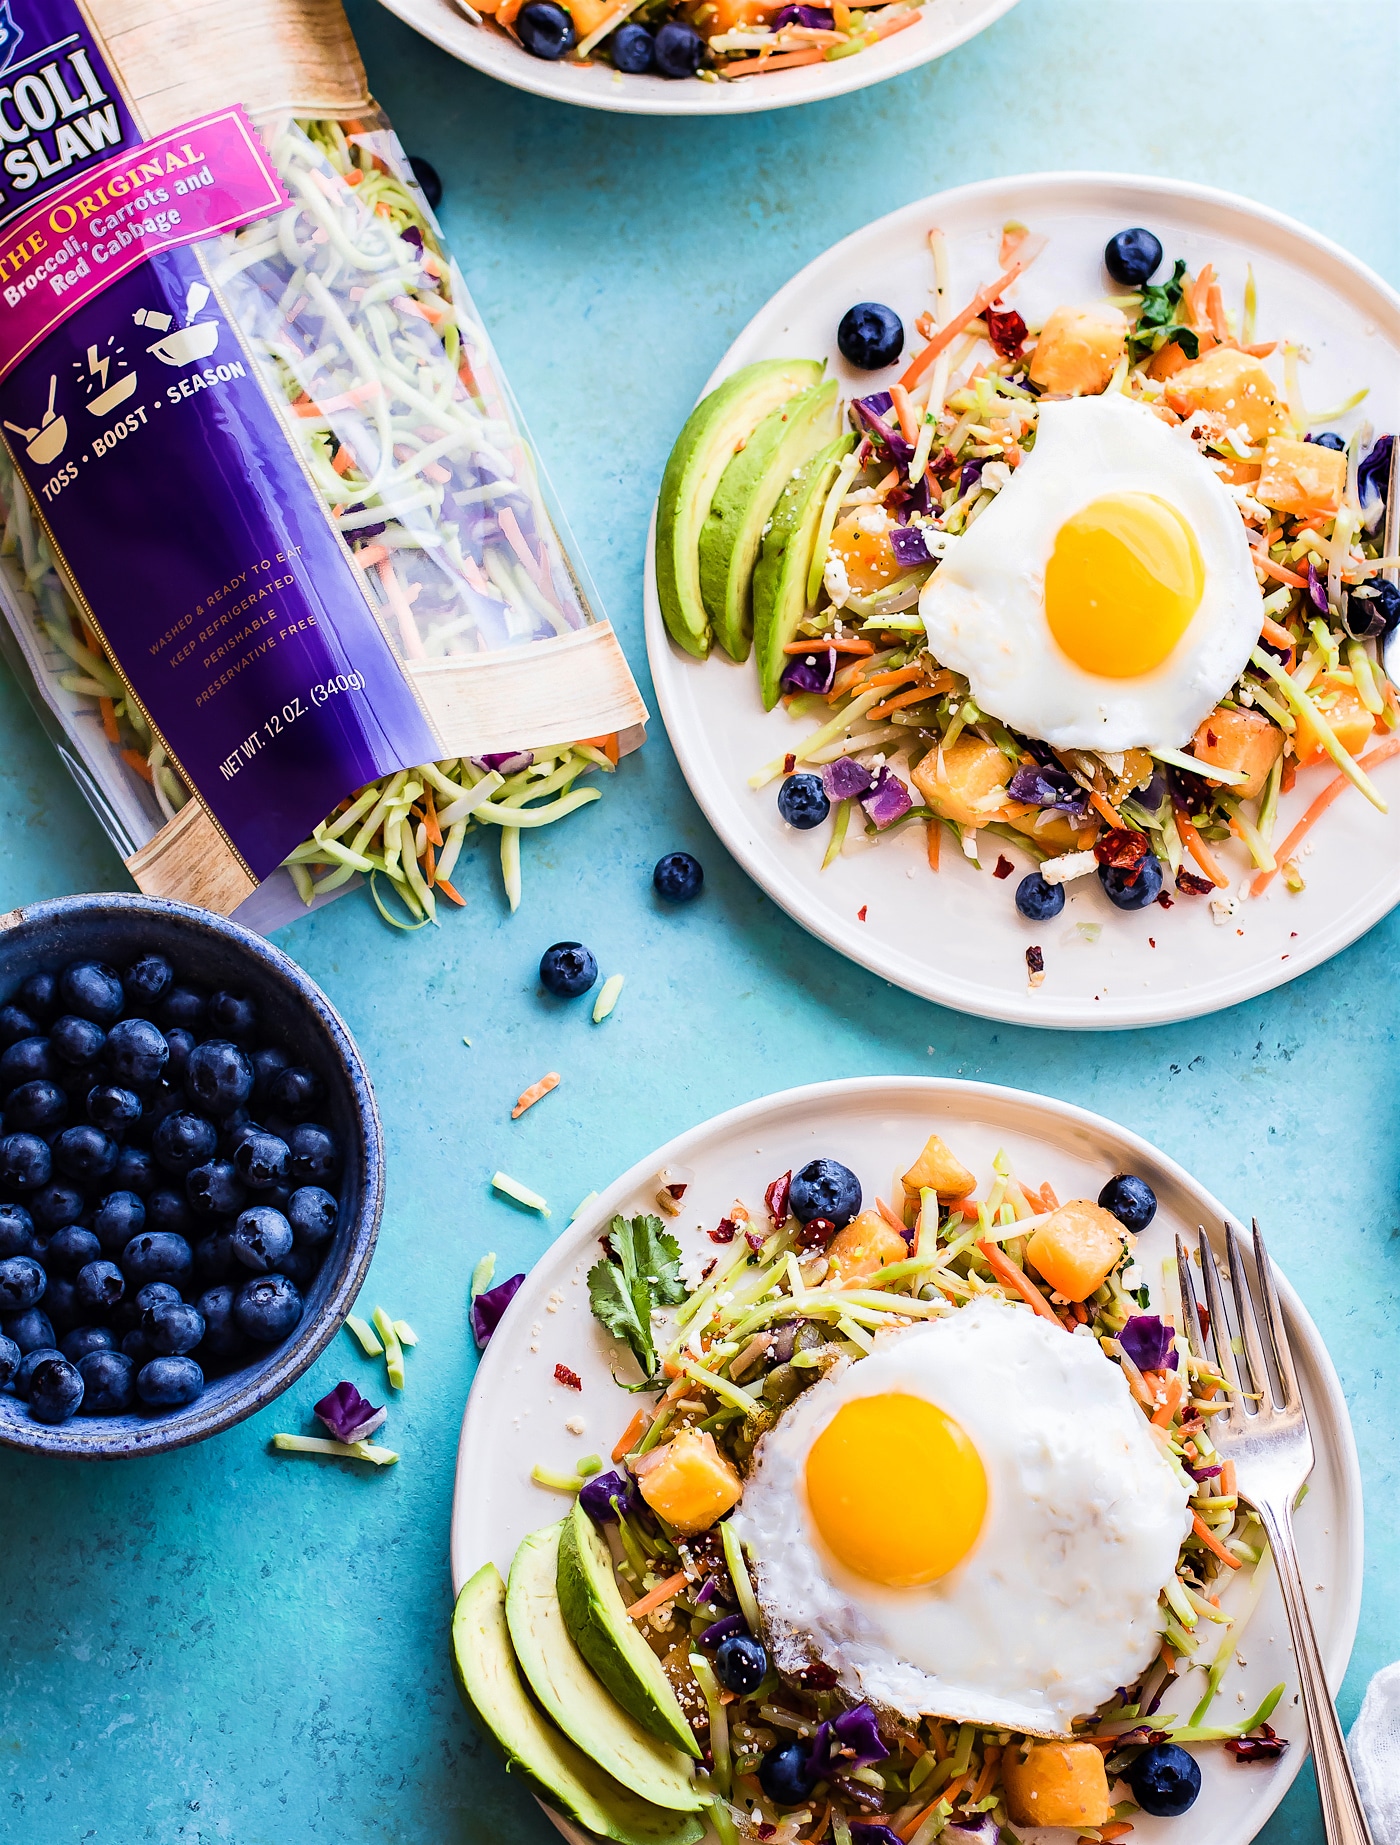 Breakfast salads are the best way to start the day! Create a healthy warm Paleo morning meal with lightly cooked broccoli cole slaw, onion, and squash topped with seasonal fruit and a protein rich fried egg! A nourishing breakfast salad worth waking up for! Easy, delicious, nutritious!